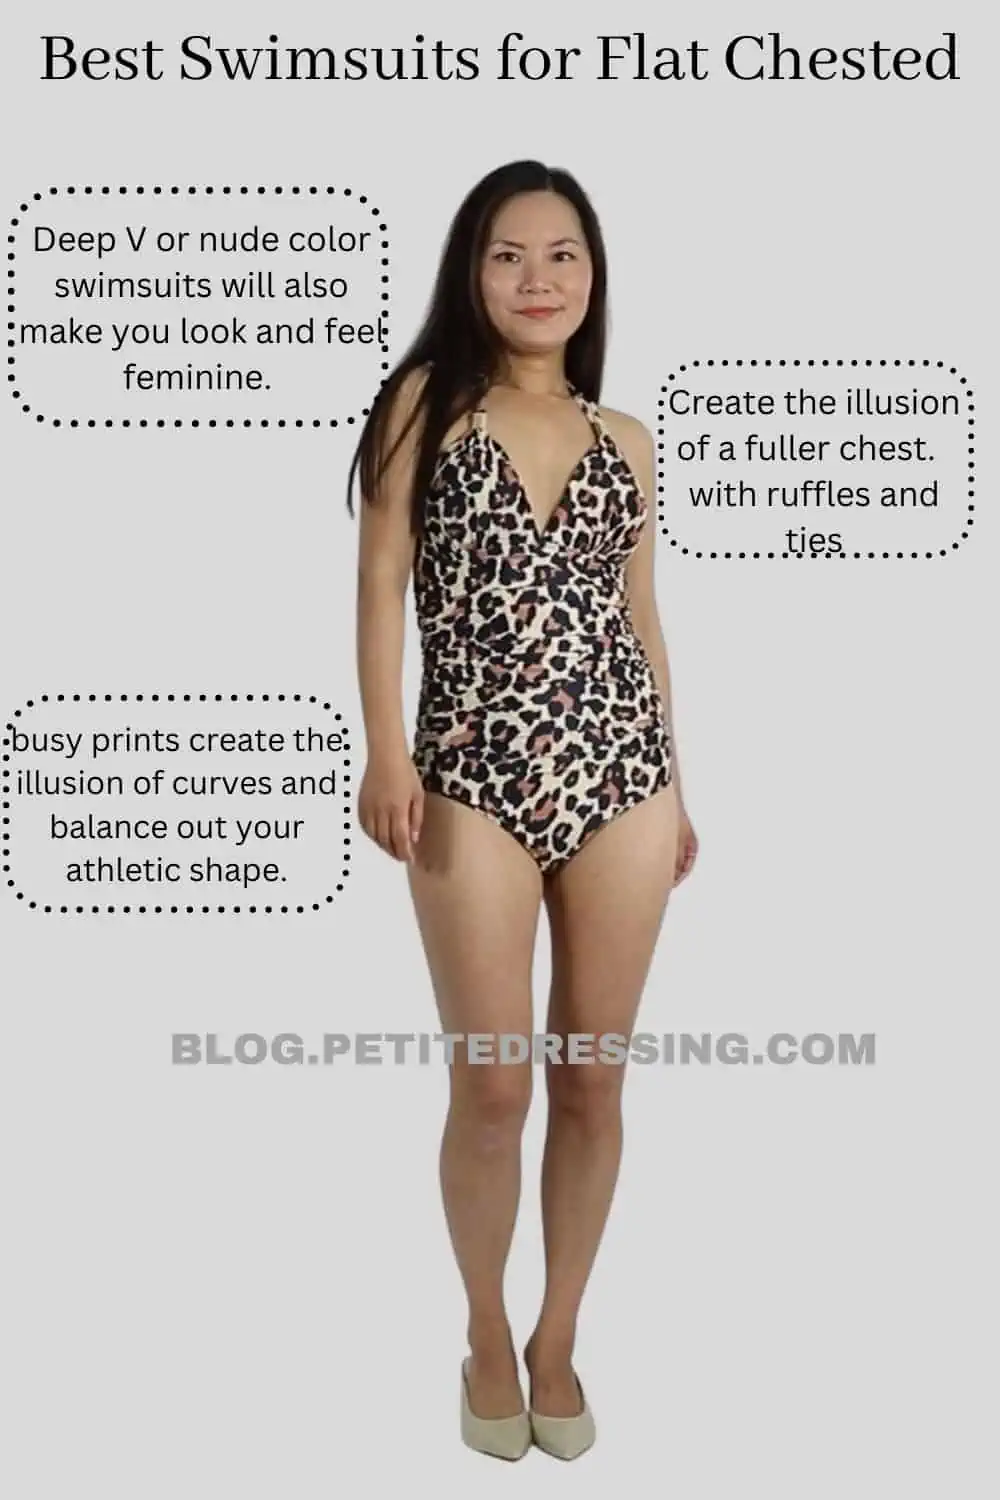 How to choose a swimsuit for a little breasted girl? Girls with